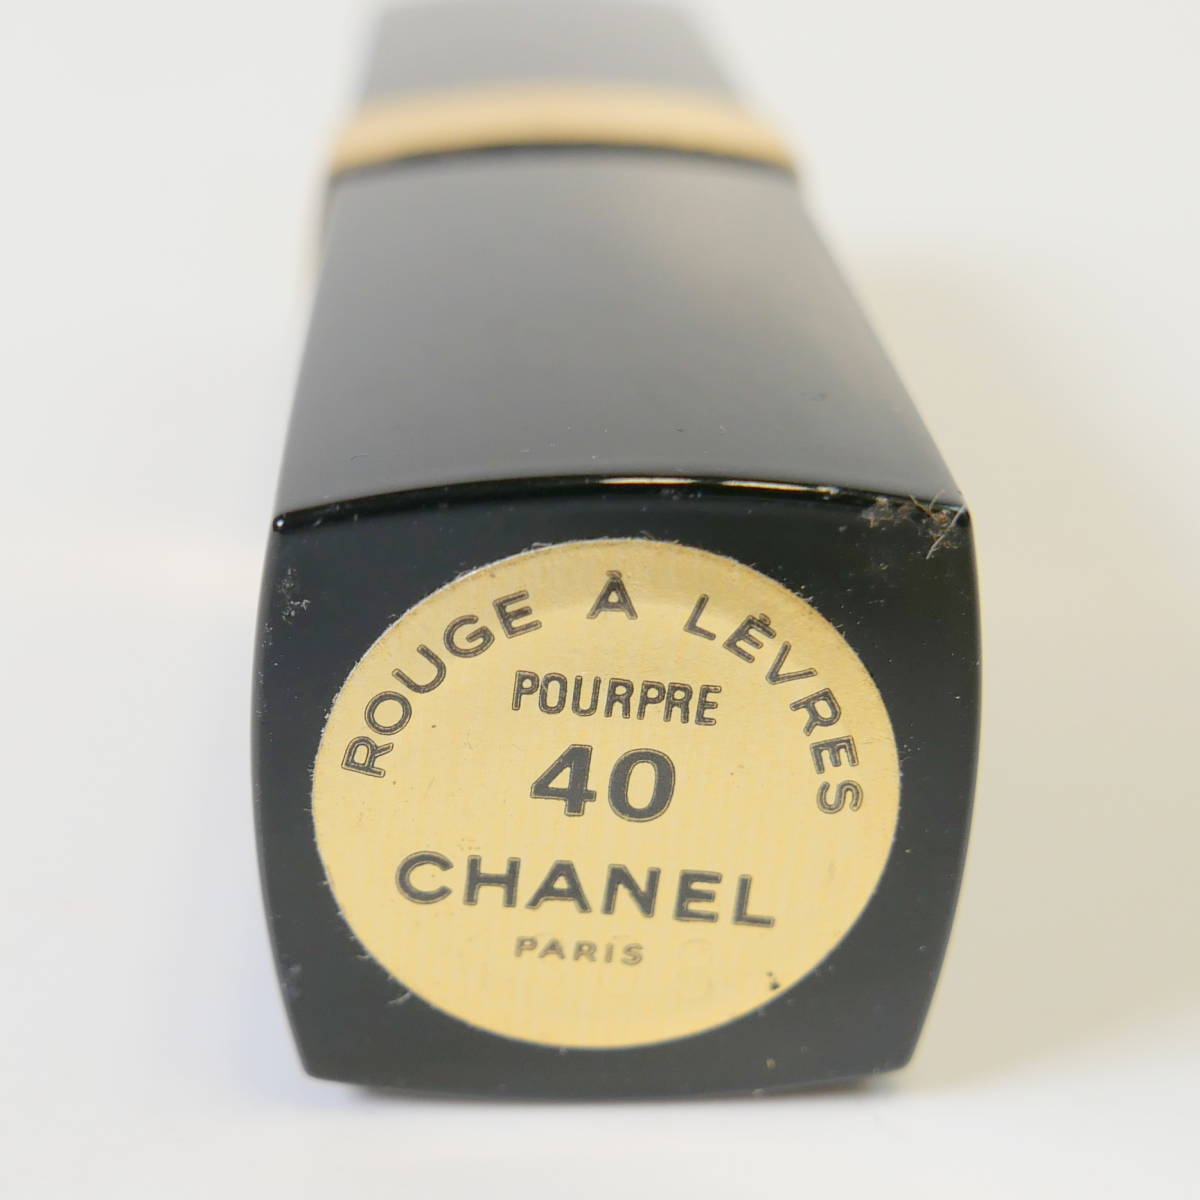  б/у cosme *CHANEL Chanel ROUGE A LEVRES помада 40 POURPRE